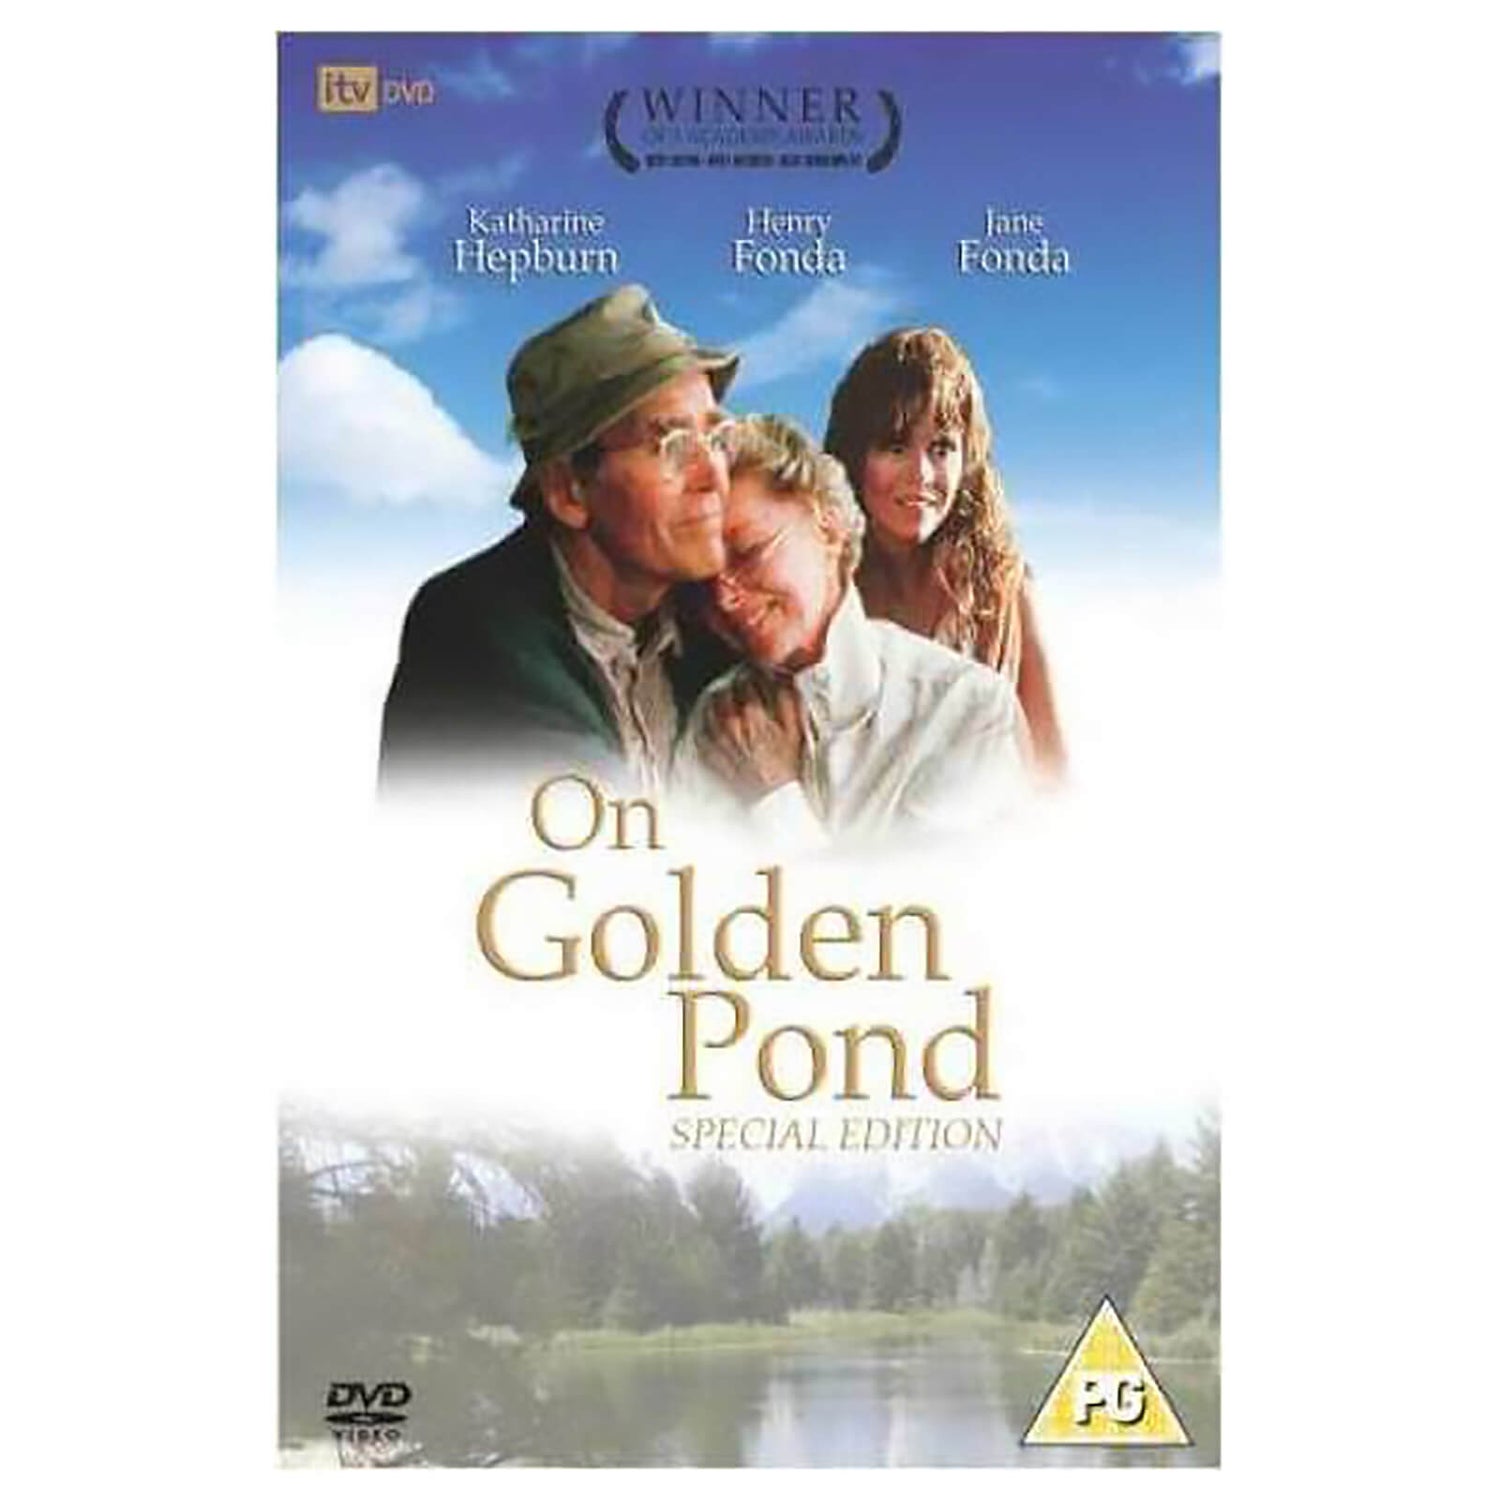 On Golden Pond [Special Edition]